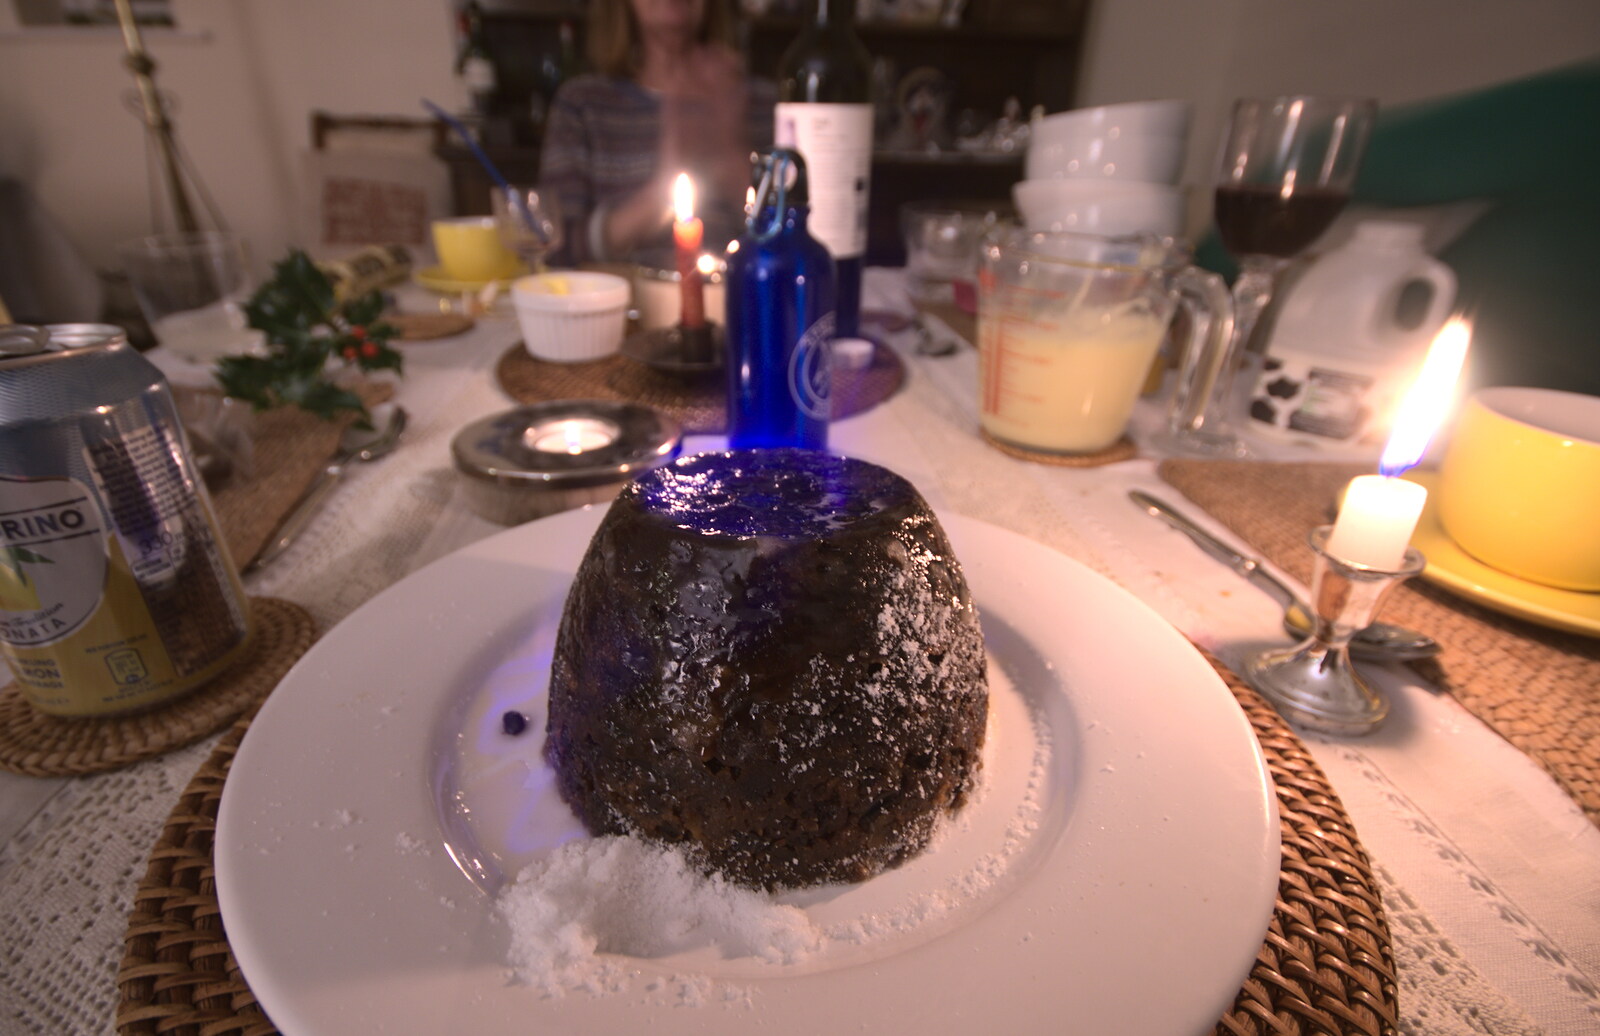 The Christmas pudding is on fire from Christmas at Grandma J's, Spreyton, Devon - 25th December 2018